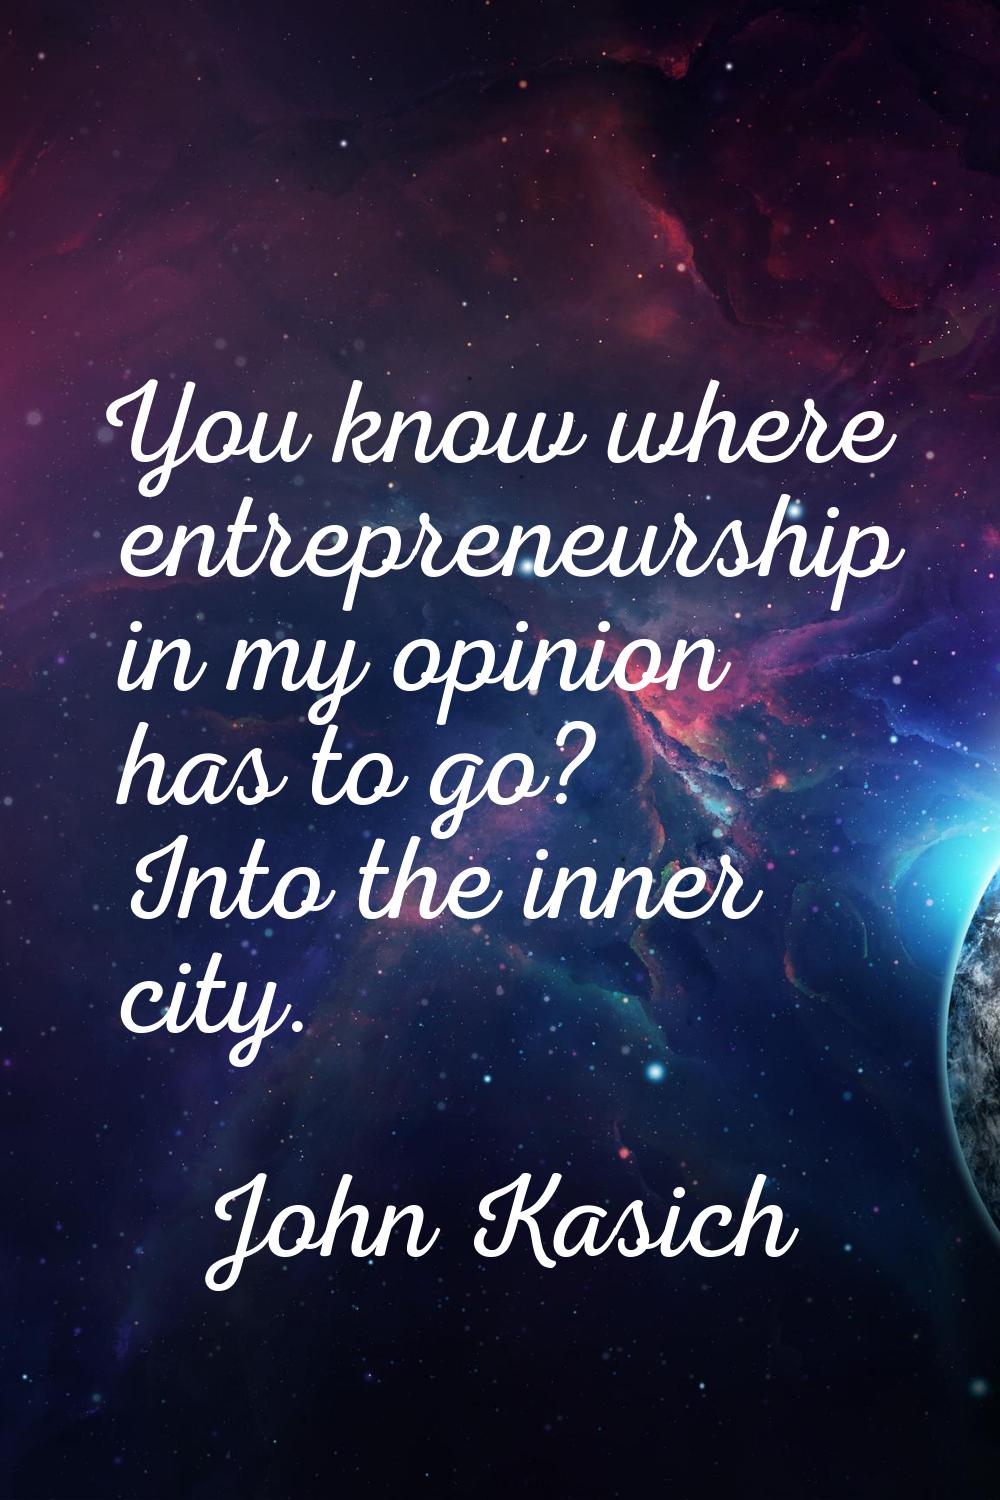 You know where entrepreneurship in my opinion has to go? Into the inner city.